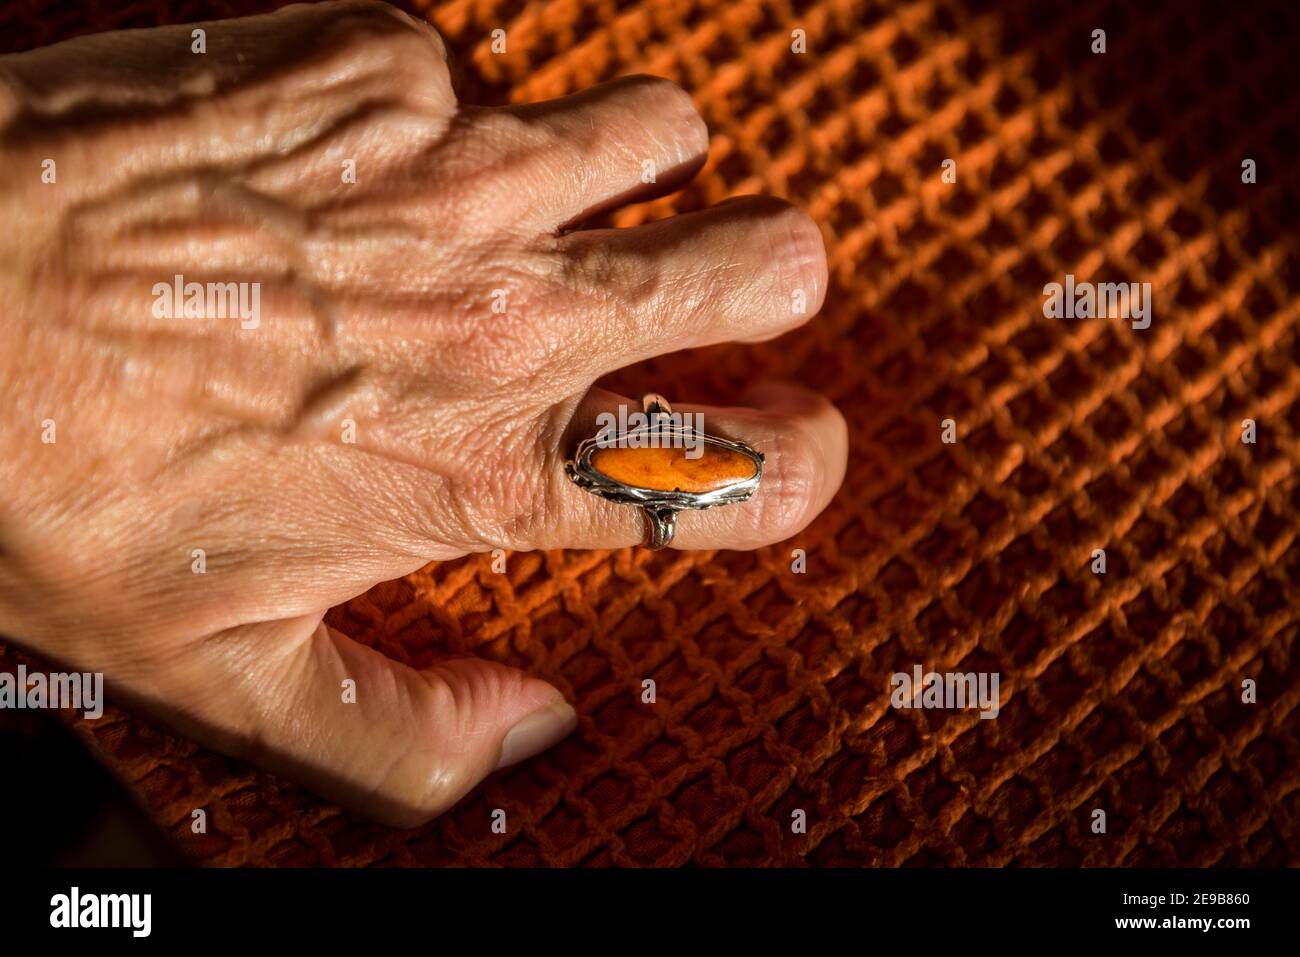 Female hand gripping an orange ring on an orange cover Stock Photo